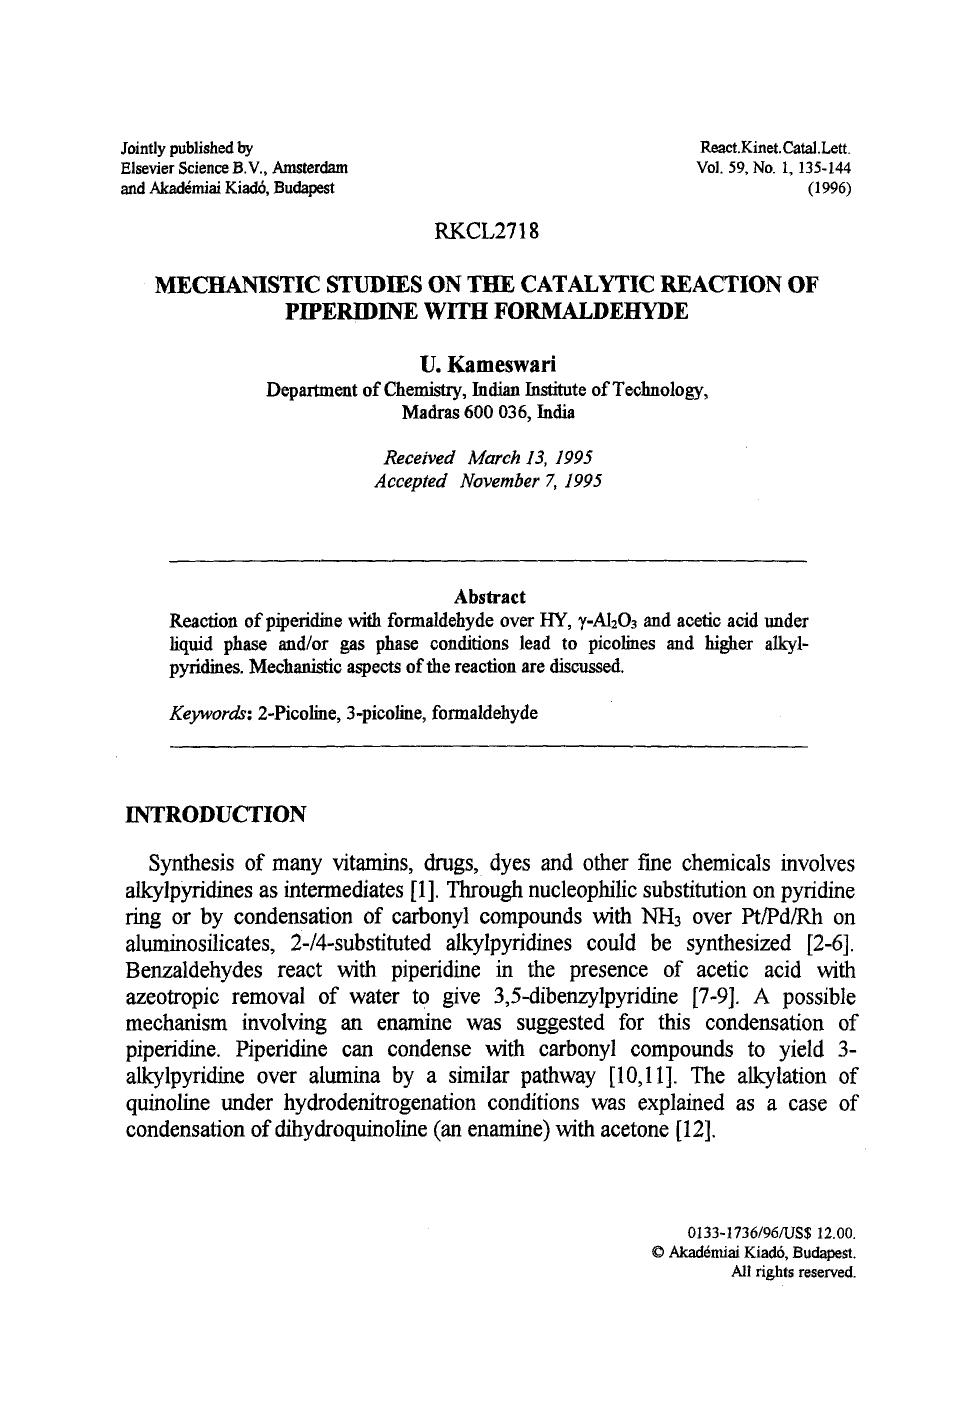 Mechanistic studies on the catalytic reaction of piperidine with formaldehyde by Unknown